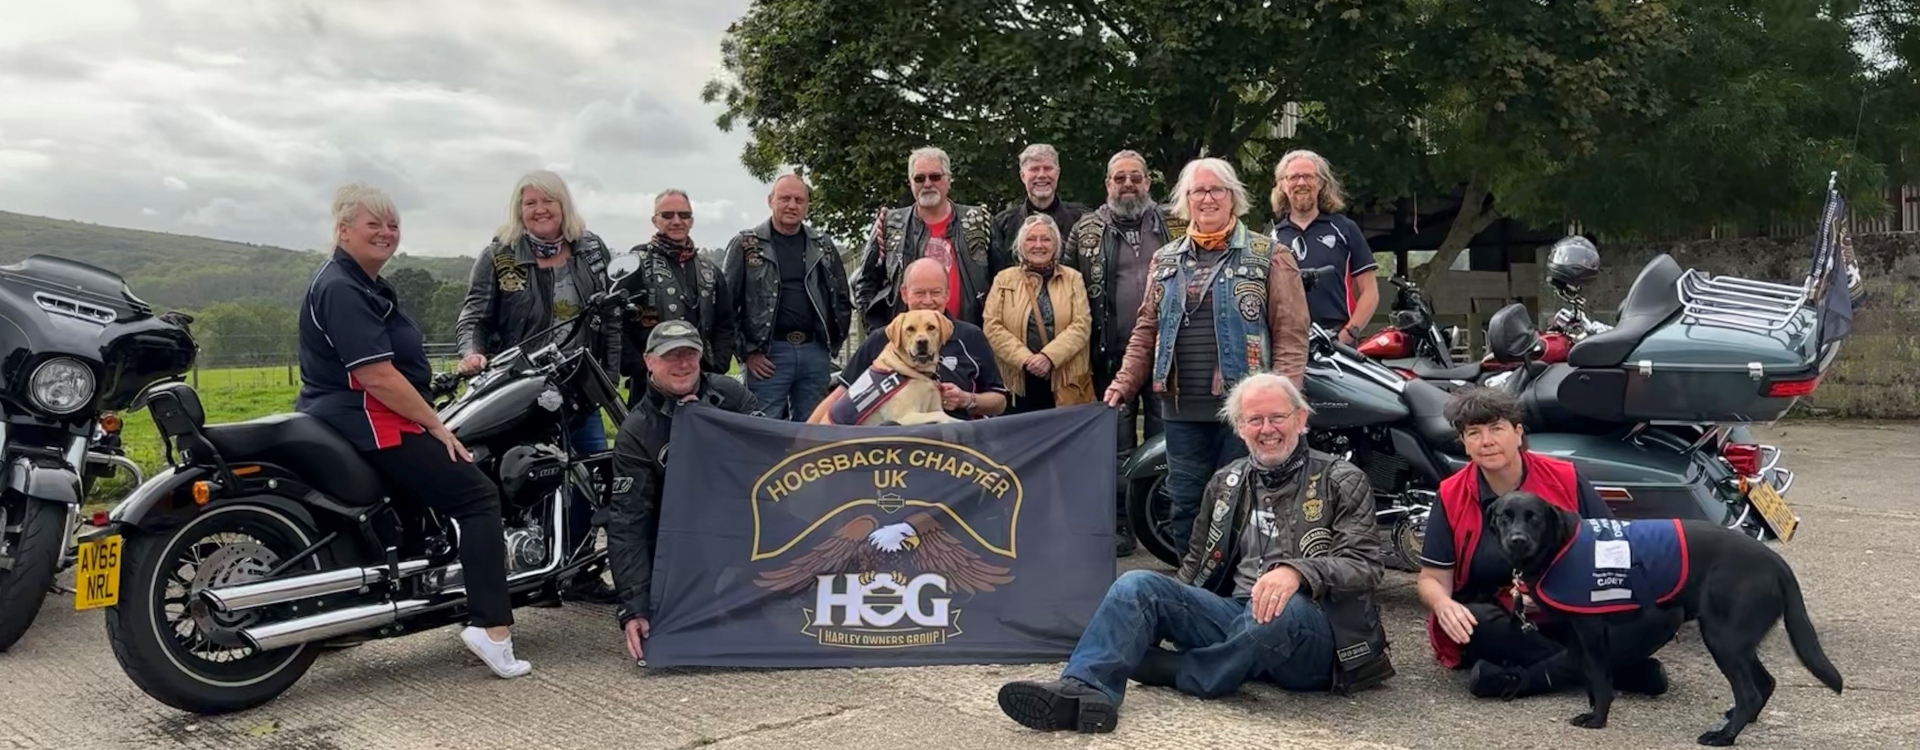 Group shot of Hogs Back Chapter with Hounds for Heroes